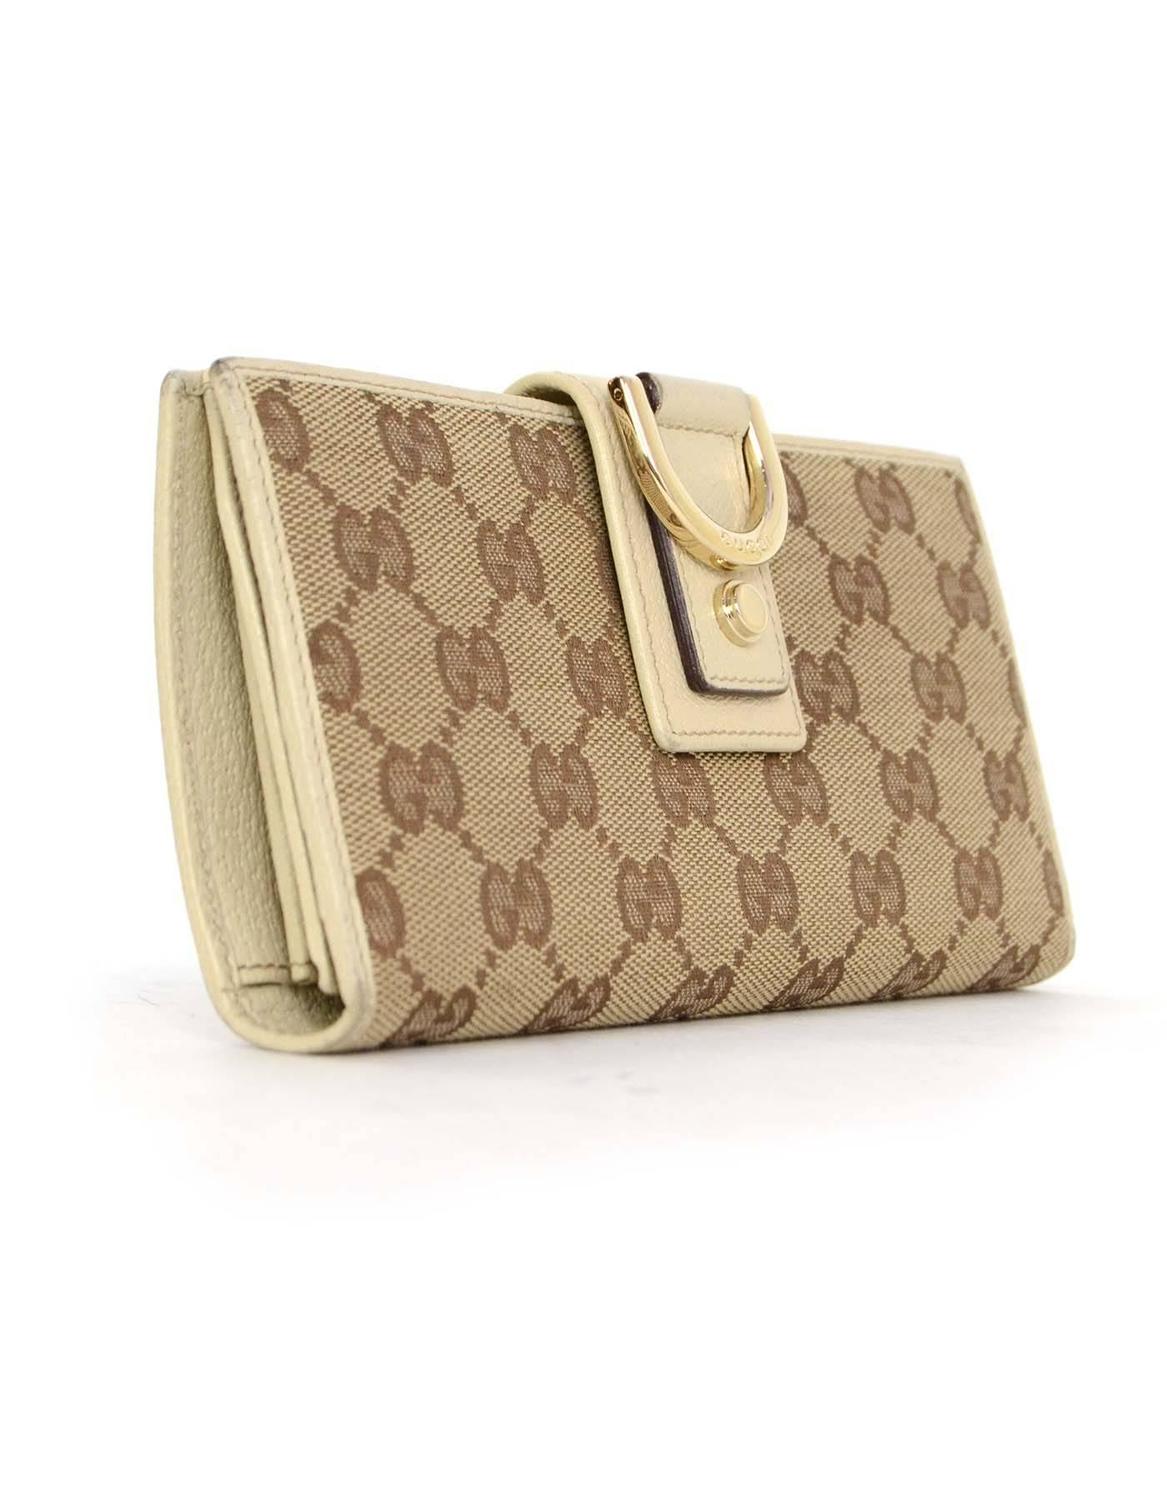 Gucci Wallet Serial Number Location